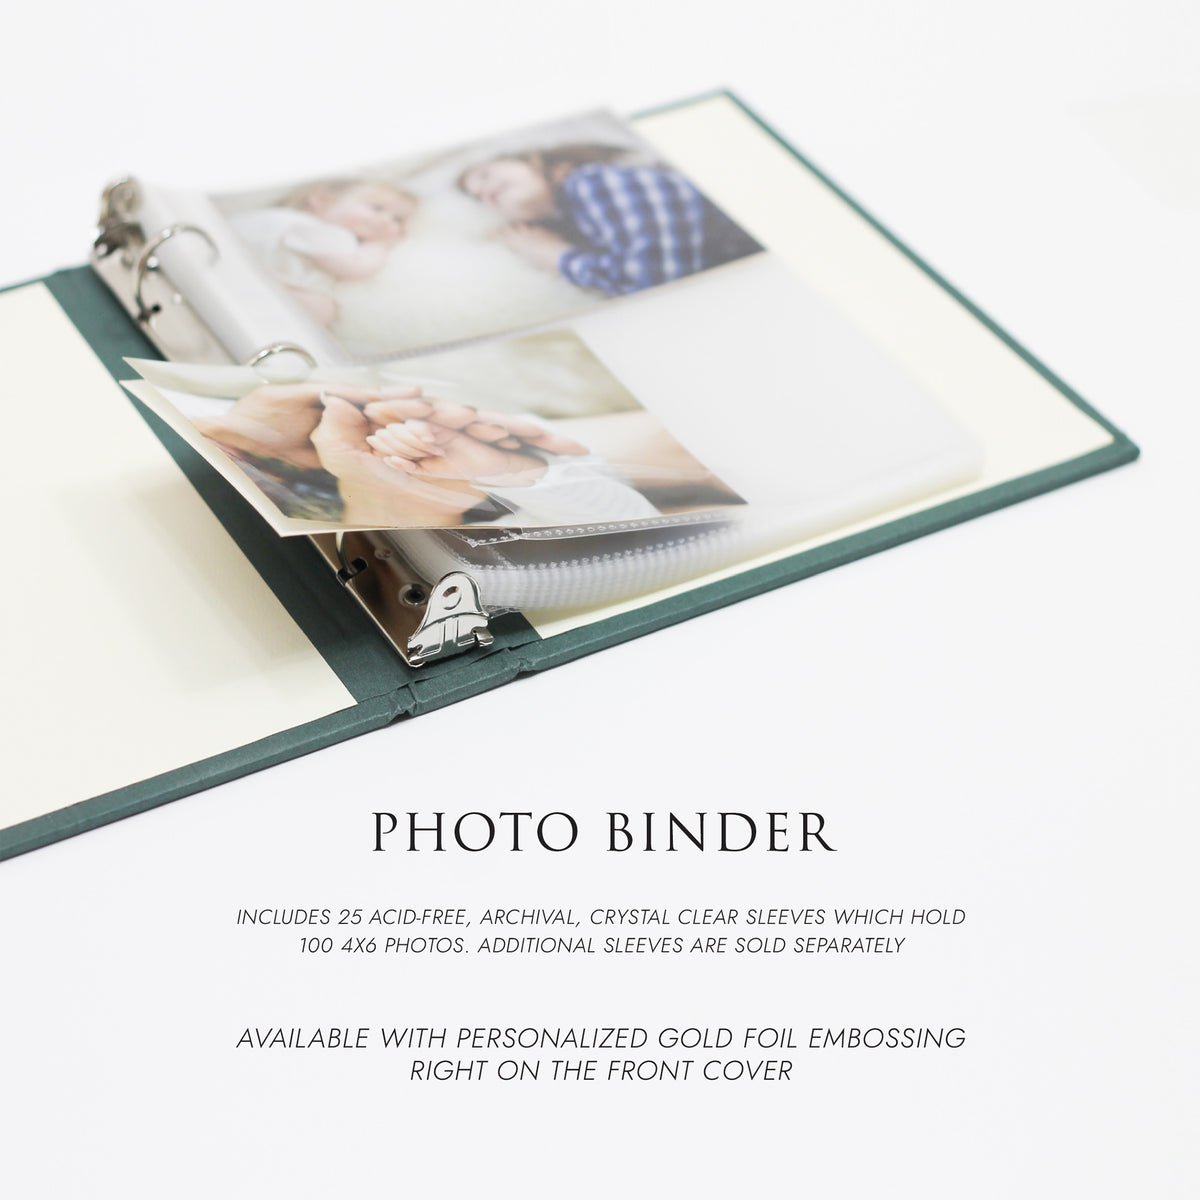 Medium Photo Binder For 4x6 Photos | Cover: Garnet Silk | Available Personalized